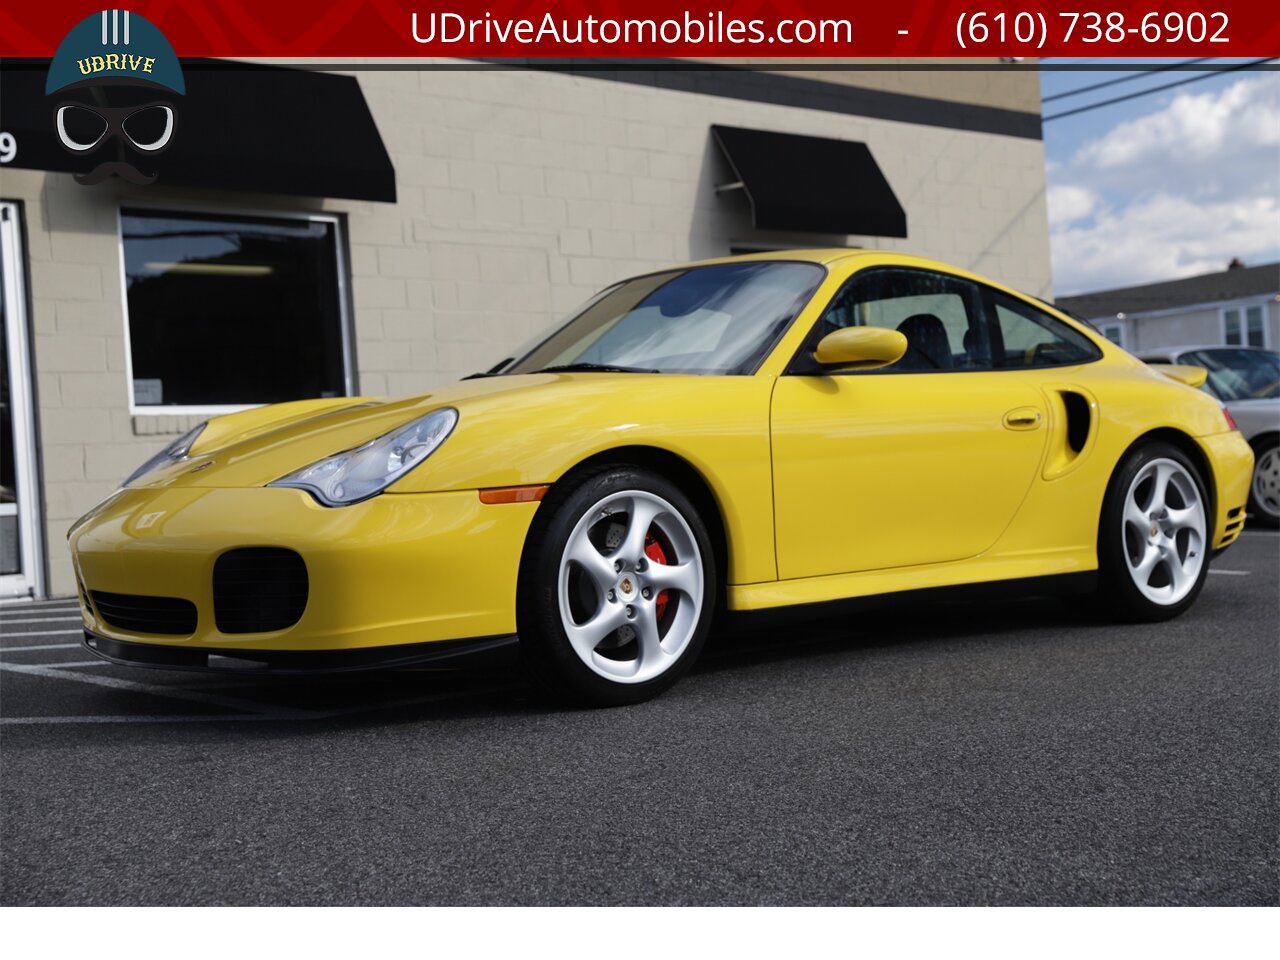 2001 Porsche 911 Turbo 996 6 Sp PTS Ferrari Giallo Modena  FULL Carbon Pkg 1 of a Kind Paint to Sample - Photo 9 - West Chester, PA 19382